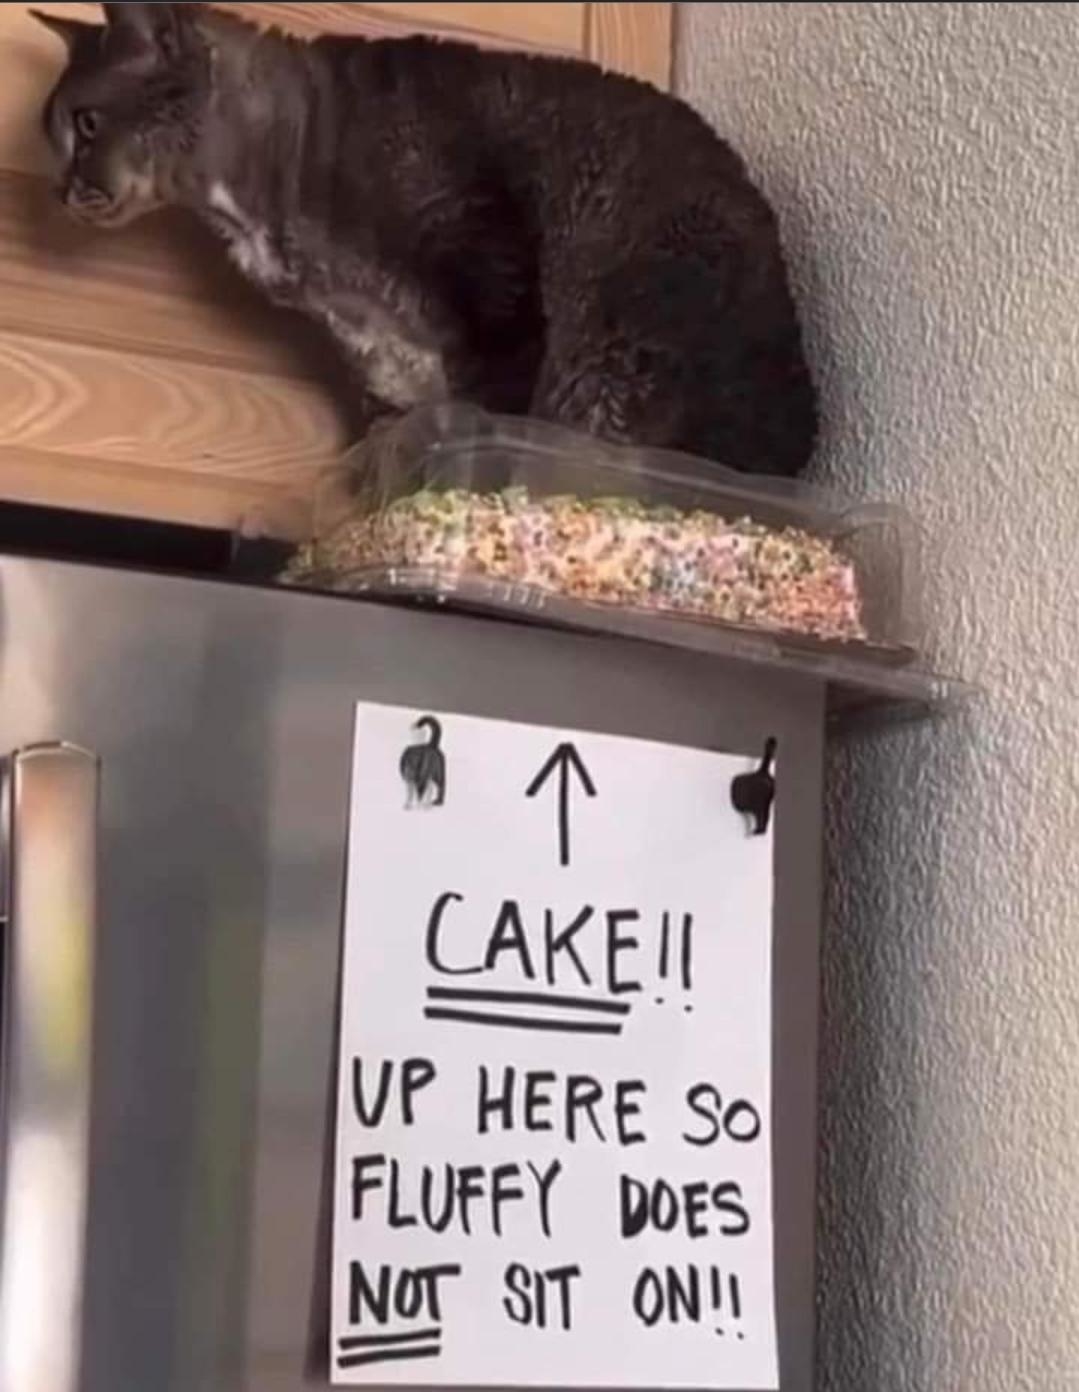 Cat sitting on top of a cake, which is on top of a fridge that has a sign with an arrow pointing up that says, &quot;Cake!! Up here so Fluffy does NOT sit on!!&quot;